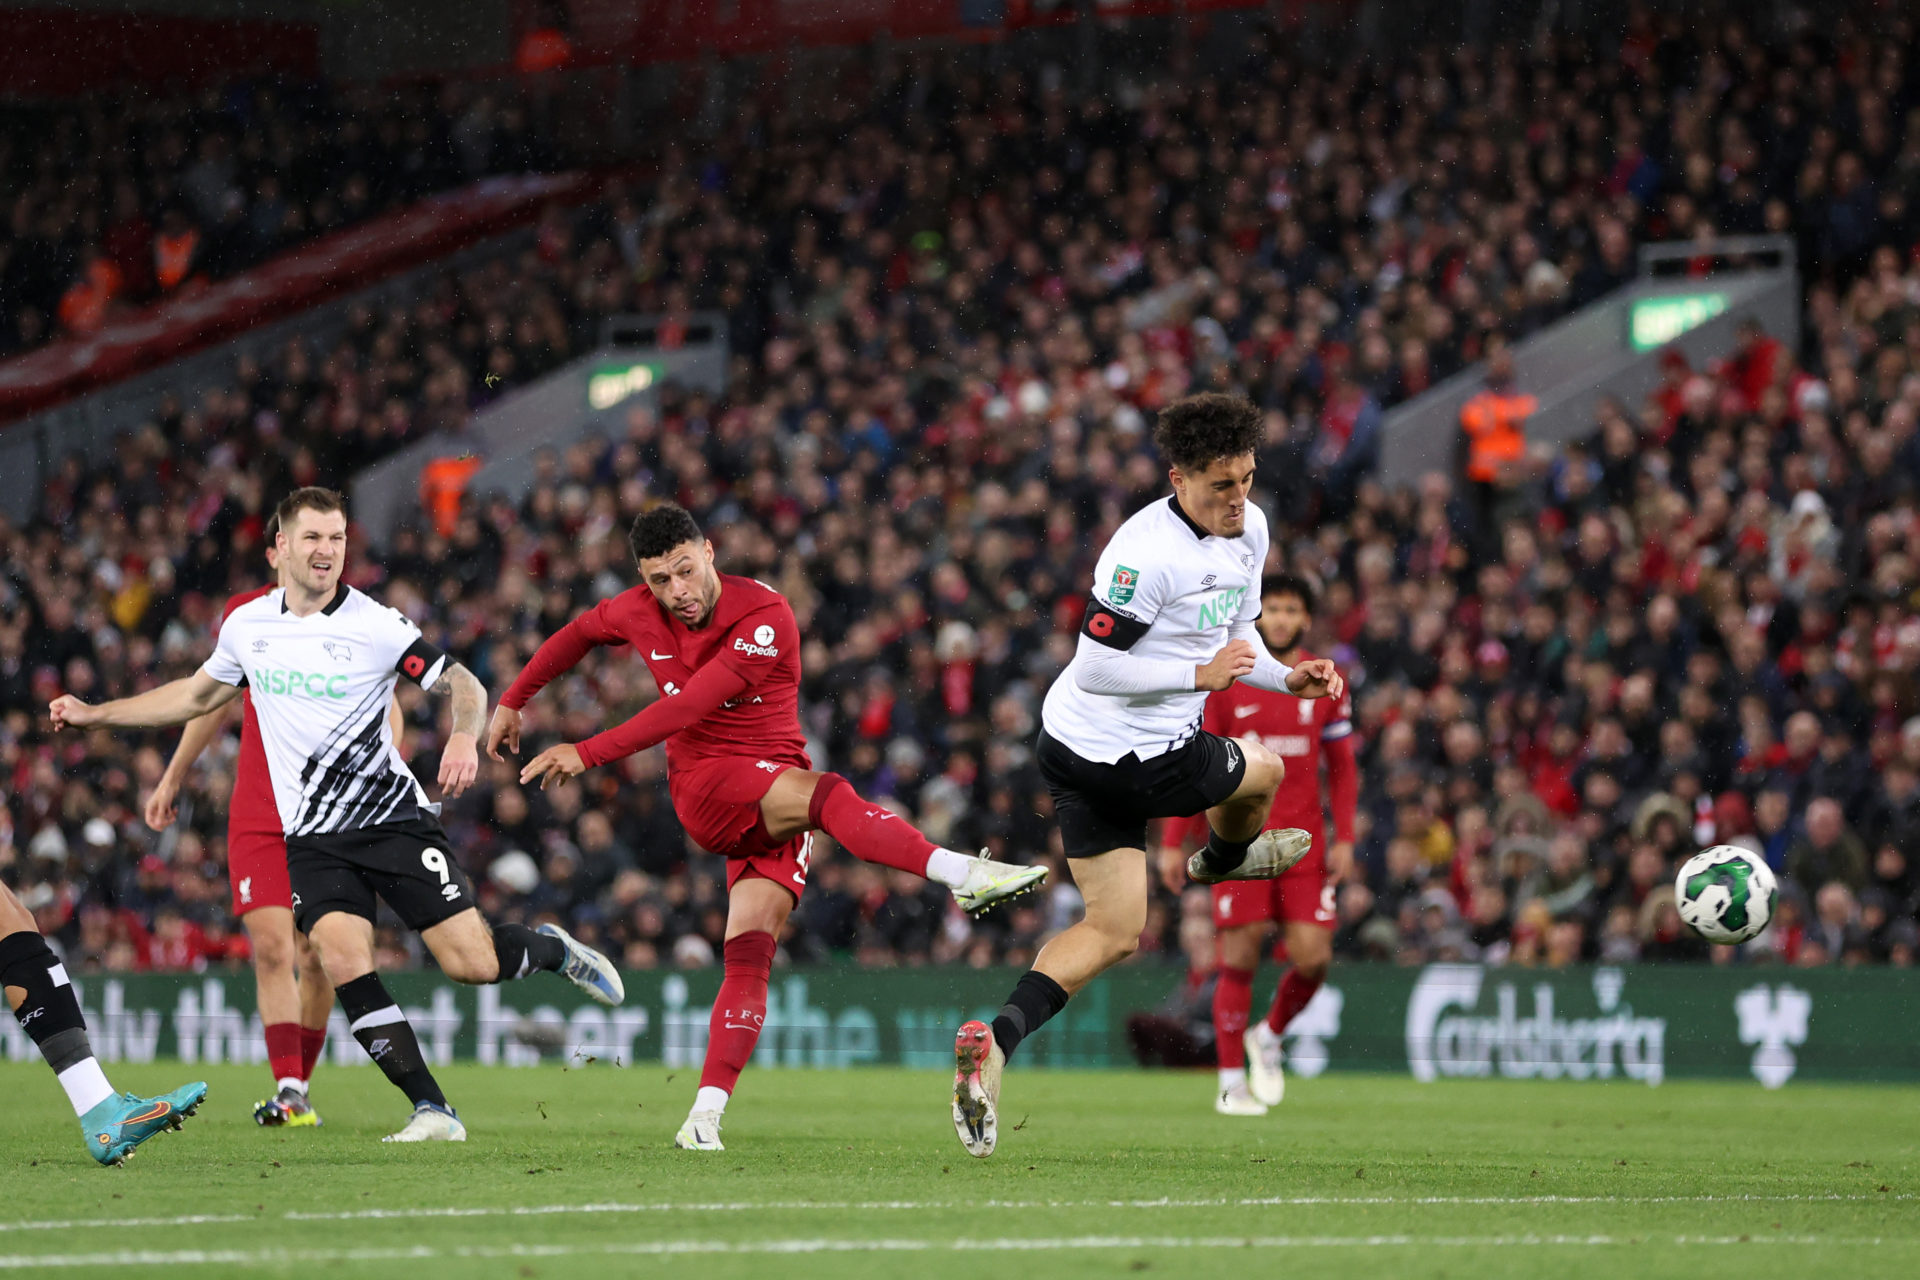 Liverpool v Derby County - Carabao Cup Third Round